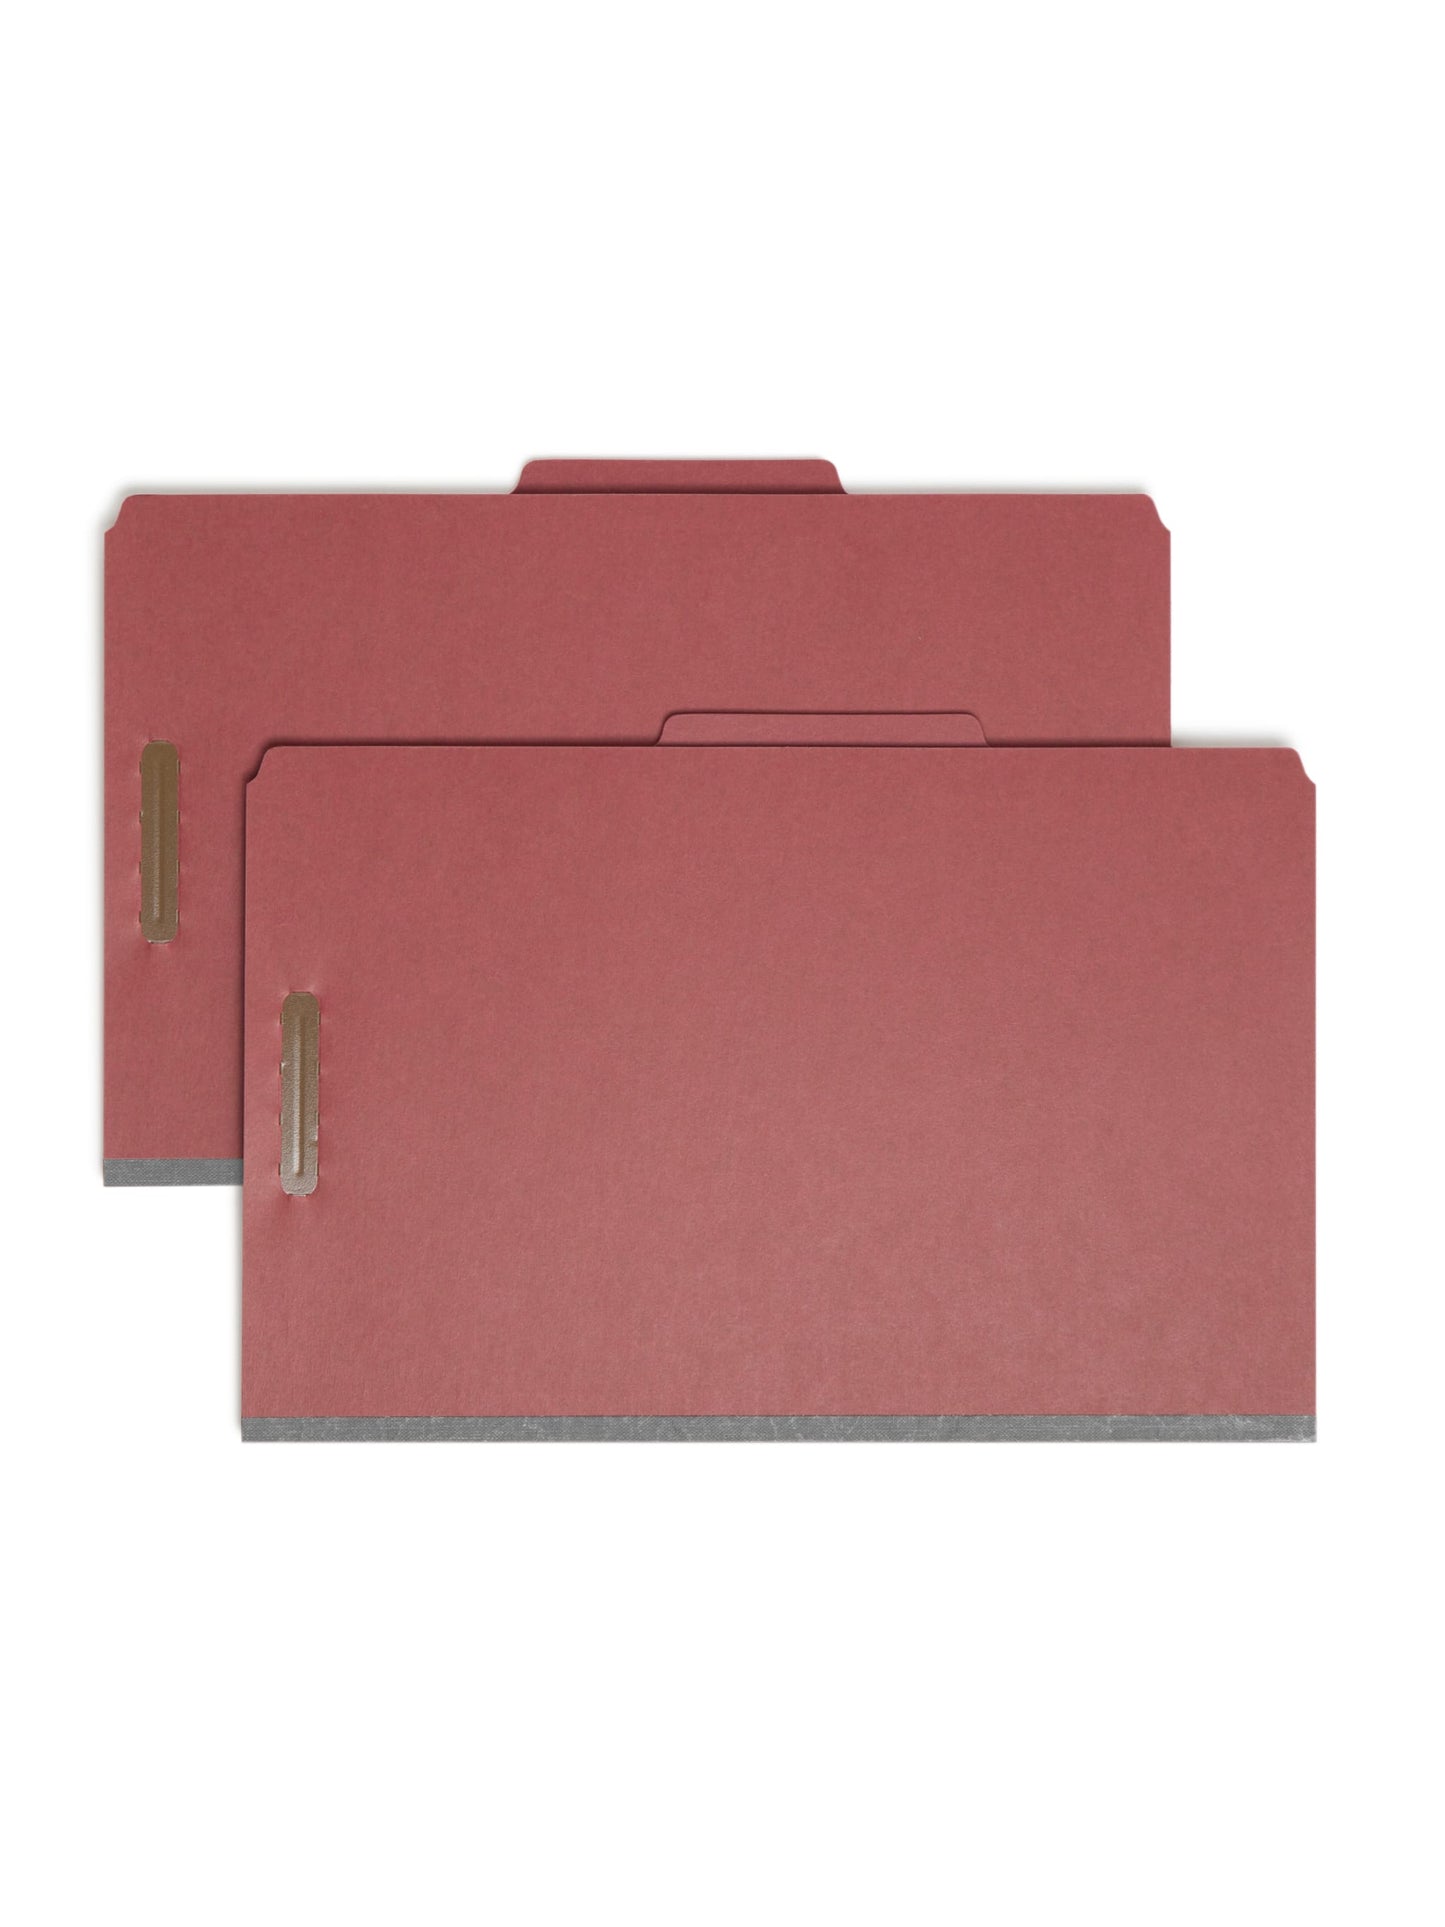 Pressboard Classification File Folders, 2 Dividers, 2 inch Expansion